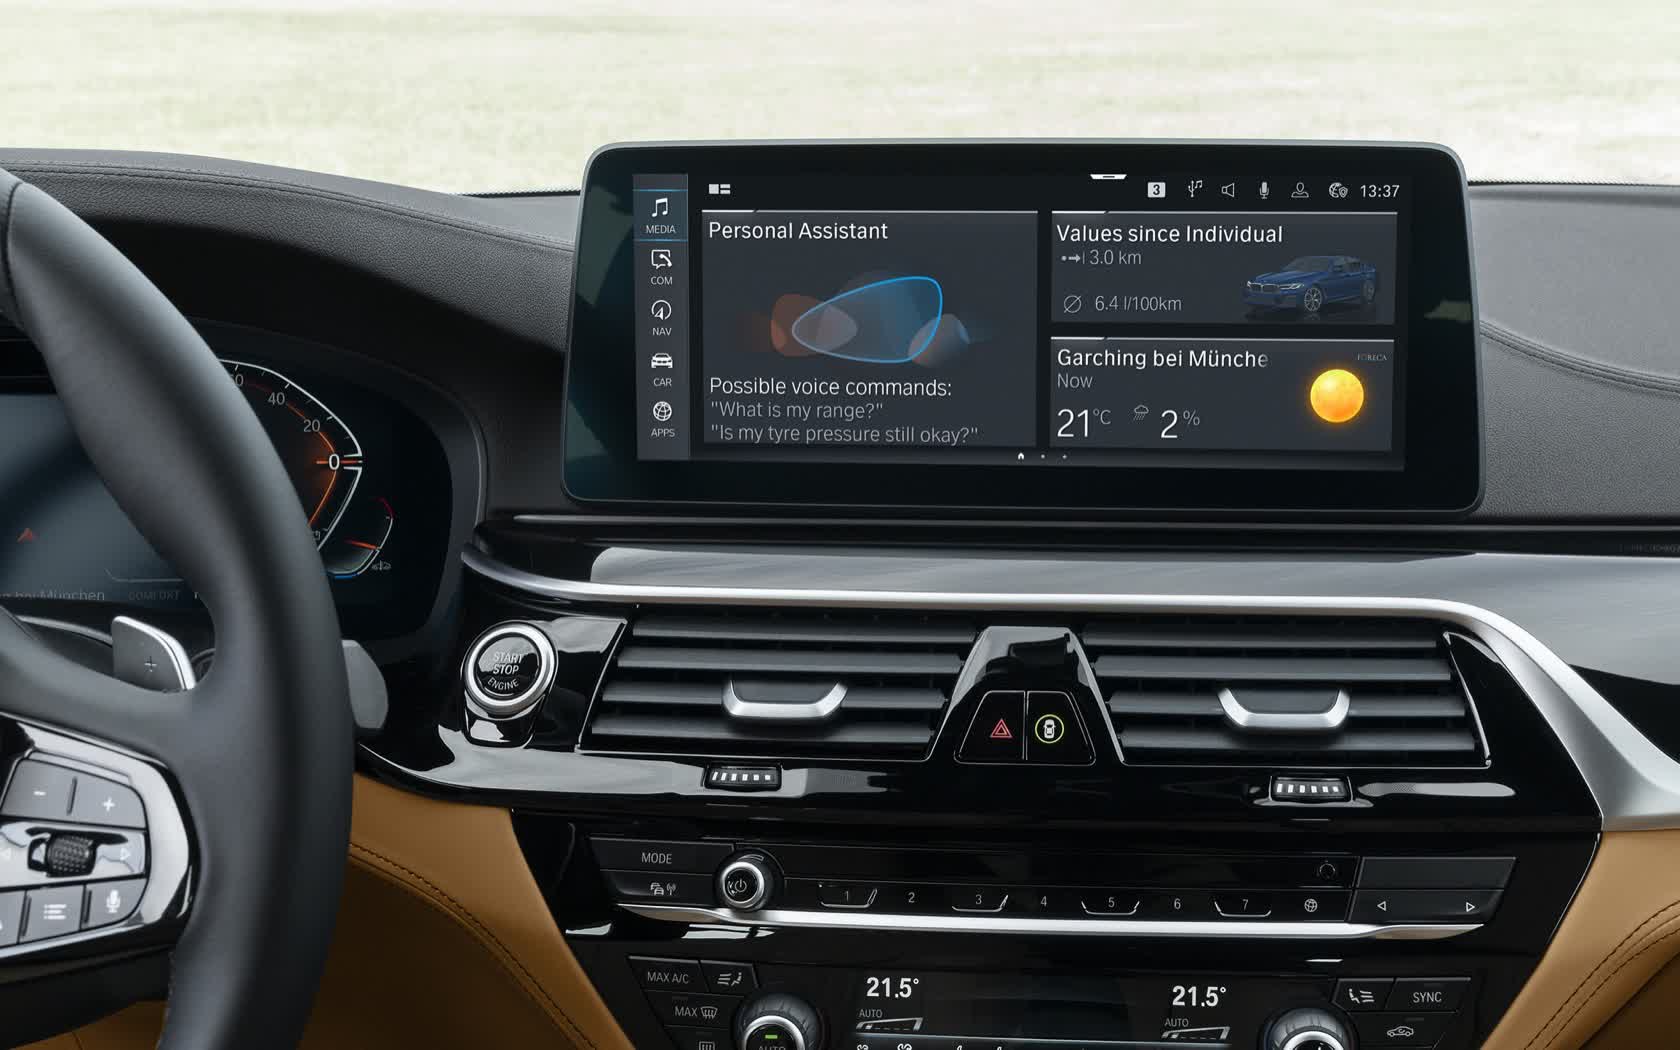 BMW is removing touchscreen functionality from some new cars due to chip shortage